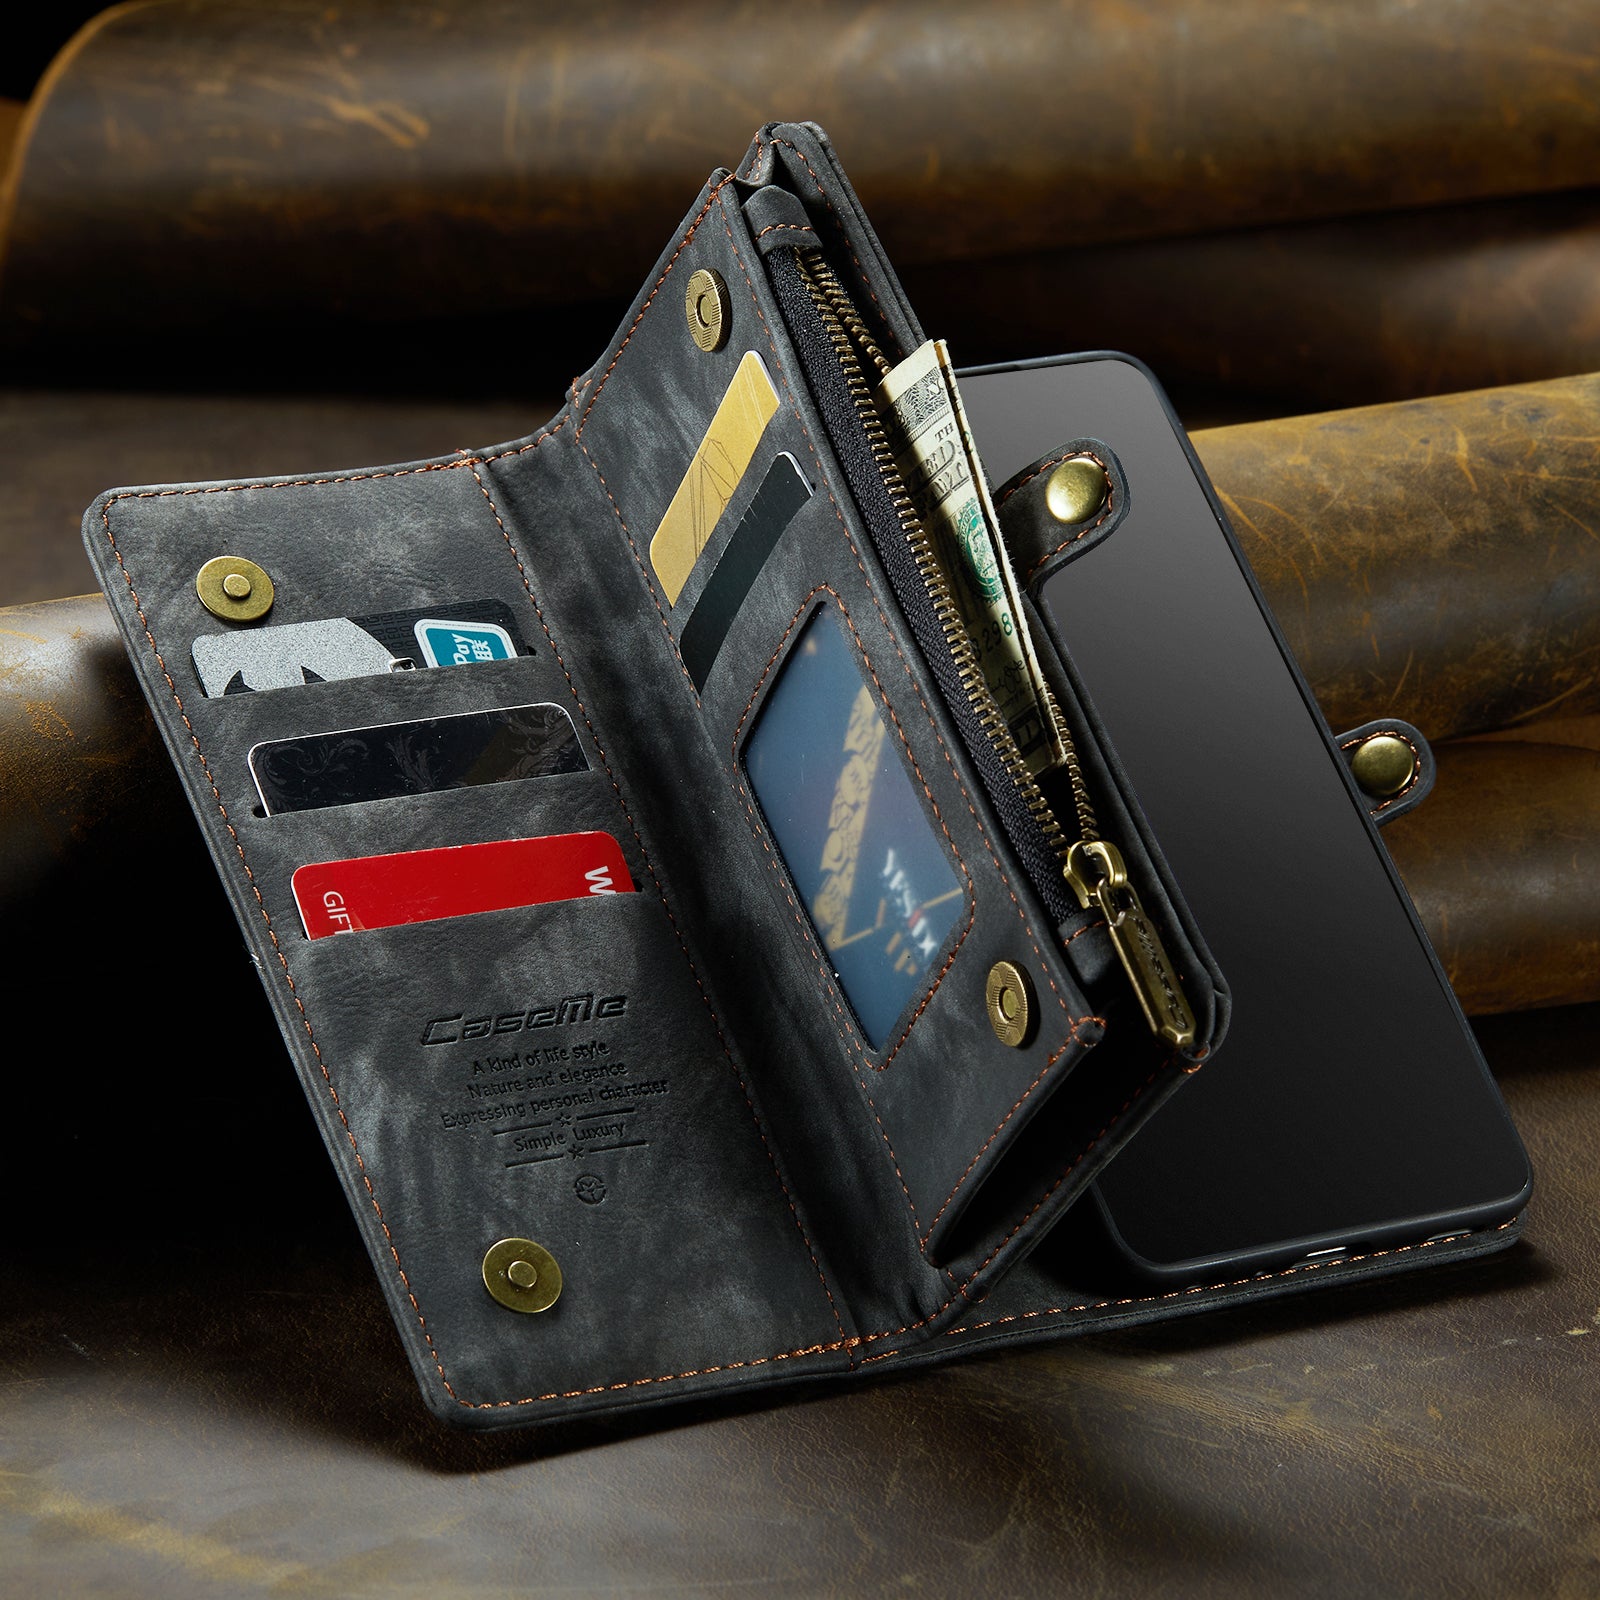 Samsung Caseme Durable Premium Leather Coin Folio with Card Holder Phone Case